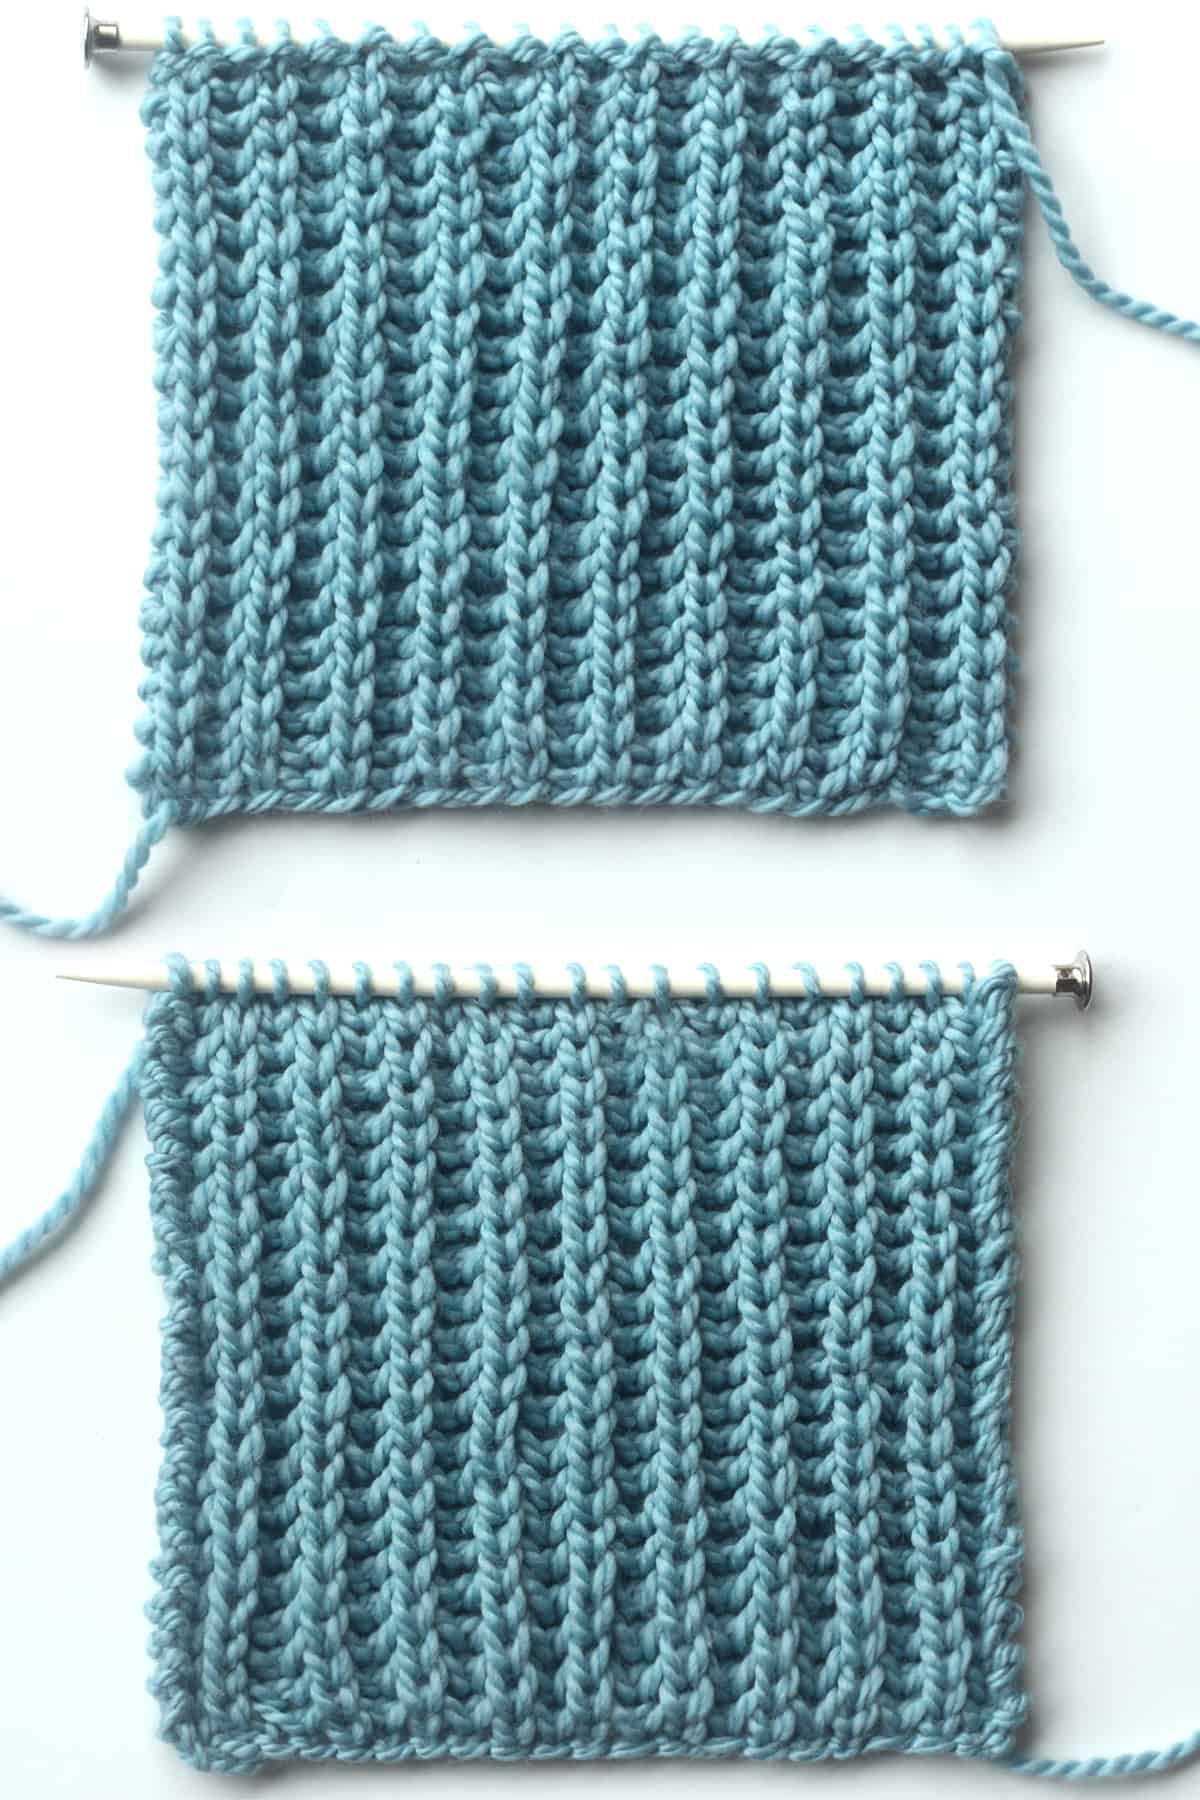 Right and wrong sides of Fisherman's Rib knit stitch pattern knitted flat with a straight knitting needle in light blue yarn color.